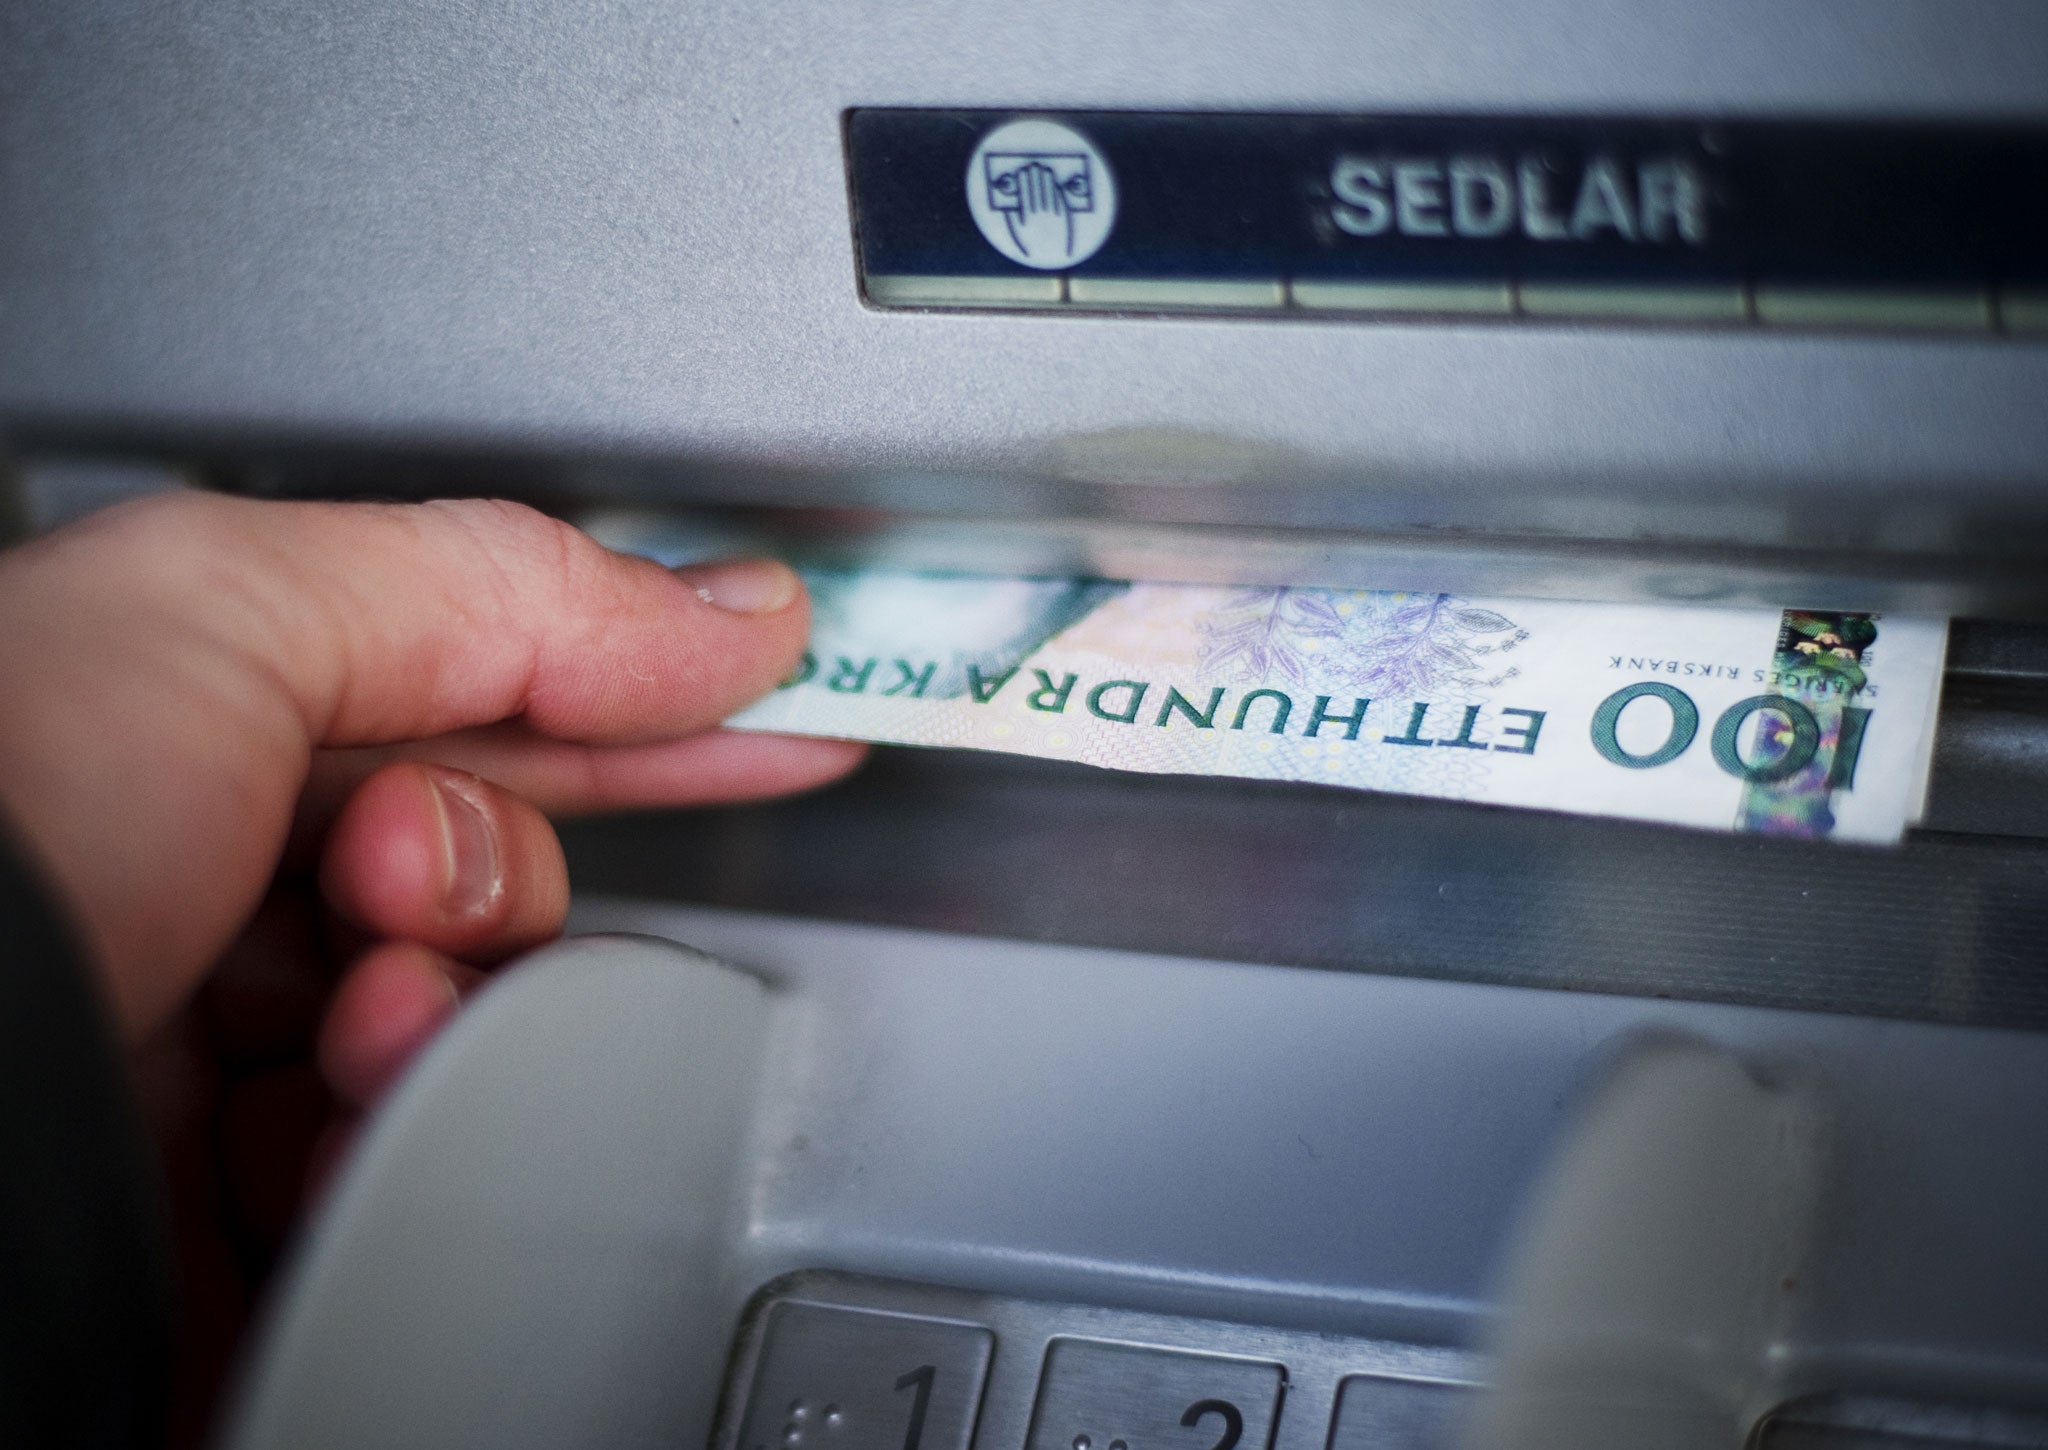 In the most cashless society on the planet, Swedish Crowns currency banknotes are withdrawn from an ATM machine in Stockholm